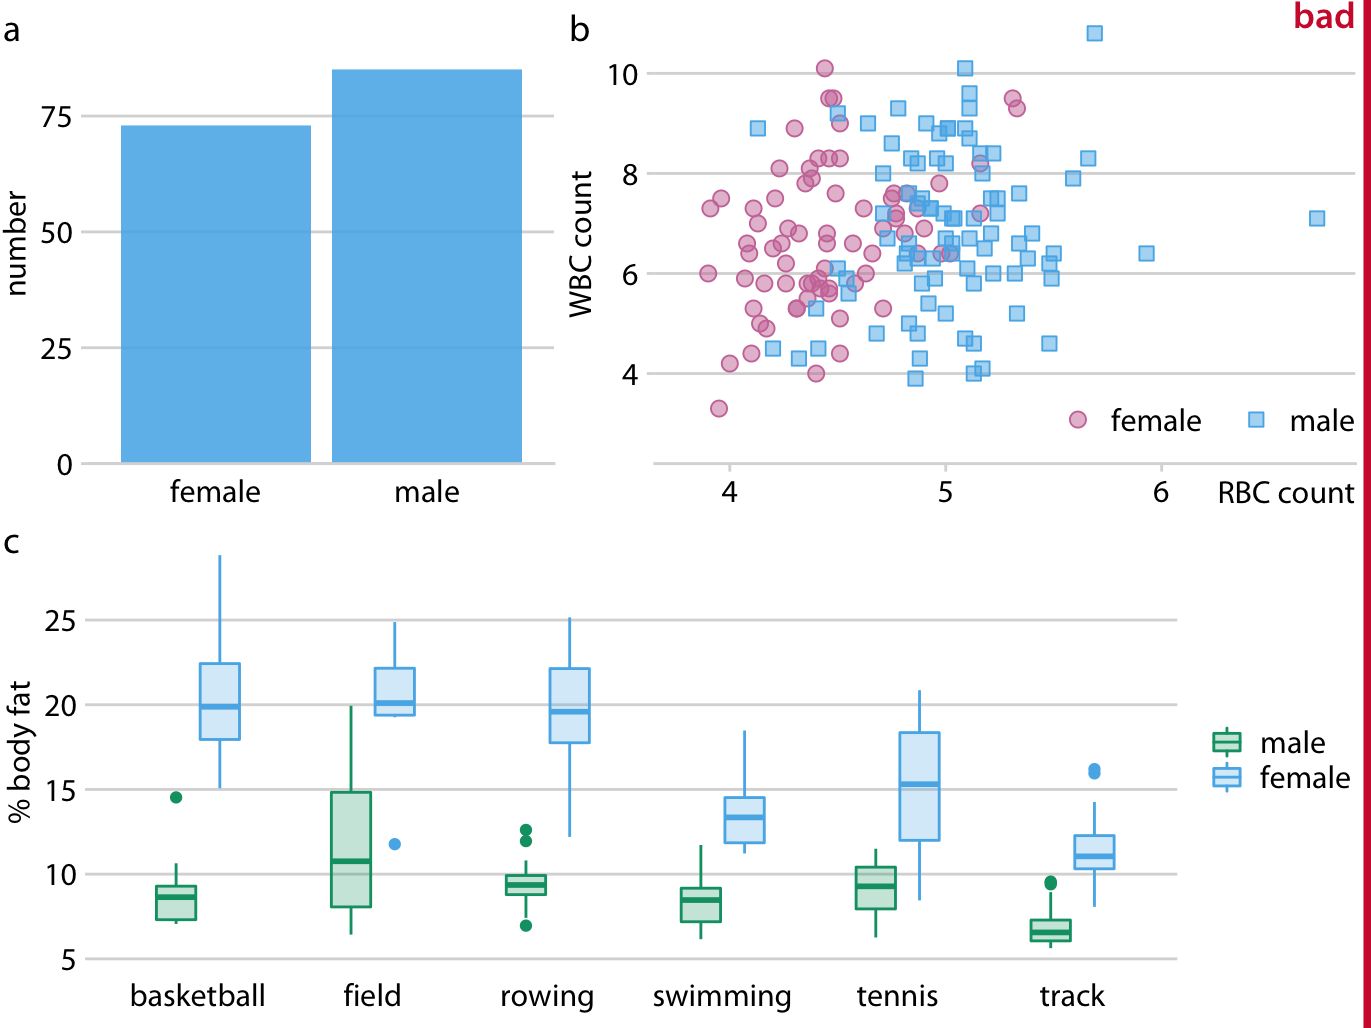 Physiology and body-composition of male and female athletes. (a) The data set encompasses 73 female and 85 male professional athletes. (b) Male athletes tend to have higher red blood cell (RBC, reported in units of \(10^{12}\) per liter) counts than female athletes, but there are no such differences for white blood cell counts (WBC, reported in units of \(10^{9}\) per liter). (c) Male athletes tend to have a lower body fat percentage than female athletes performing in the same sport. Data source: Telford and Cunningham (1991)